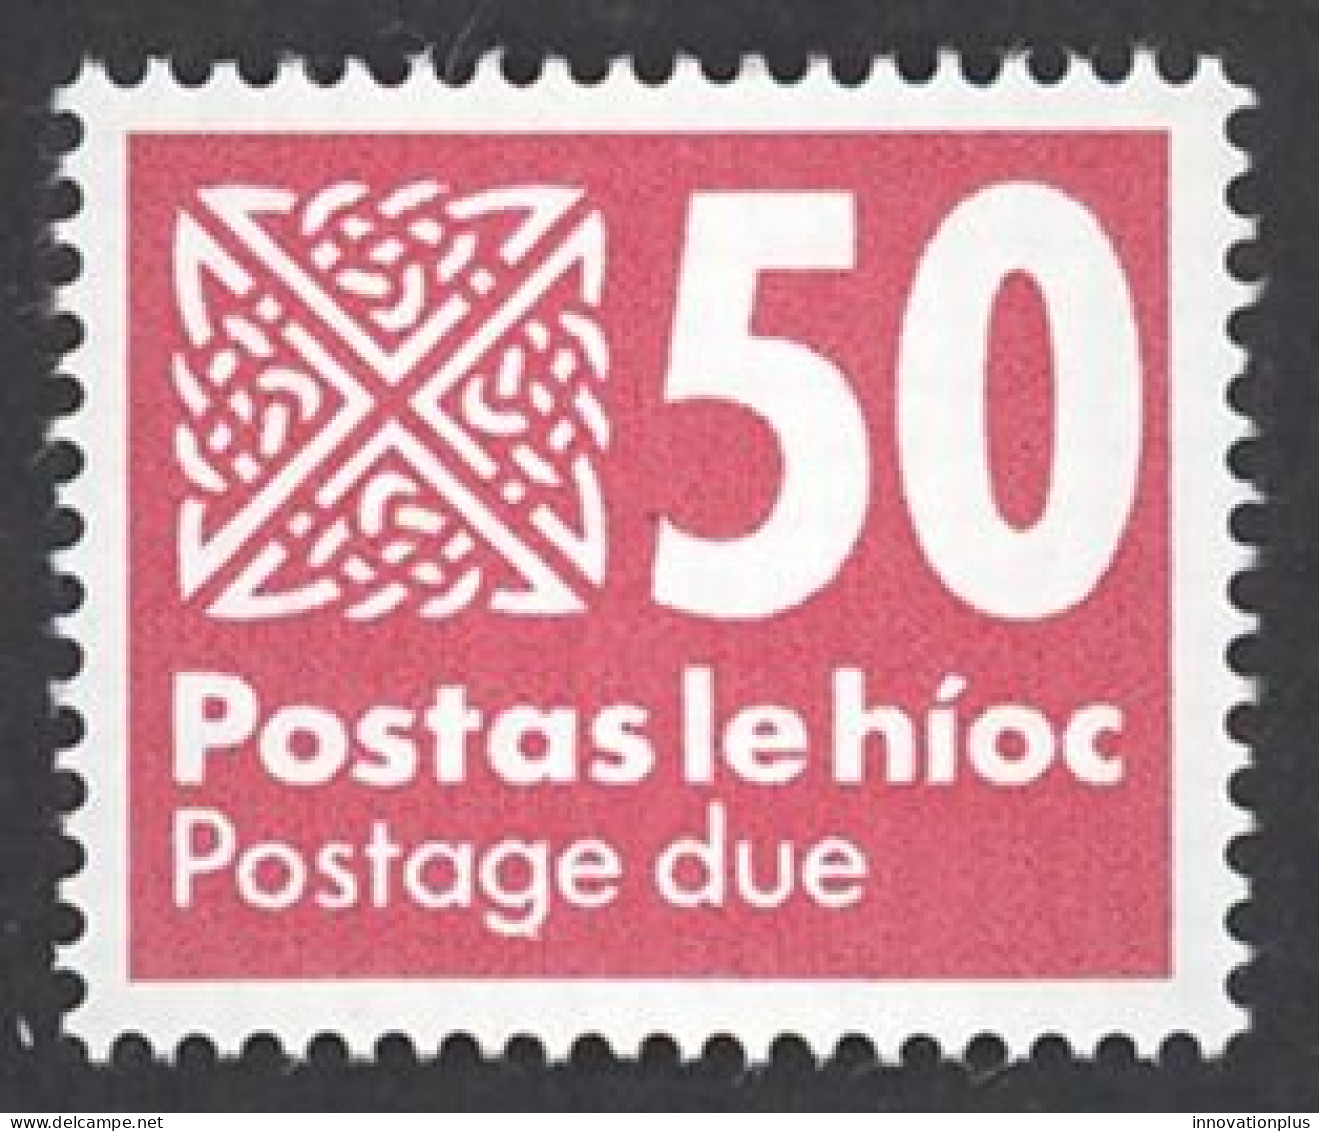 Ireland Sc# J36 MNH 1985 50p Postage Due - Timbres-taxe